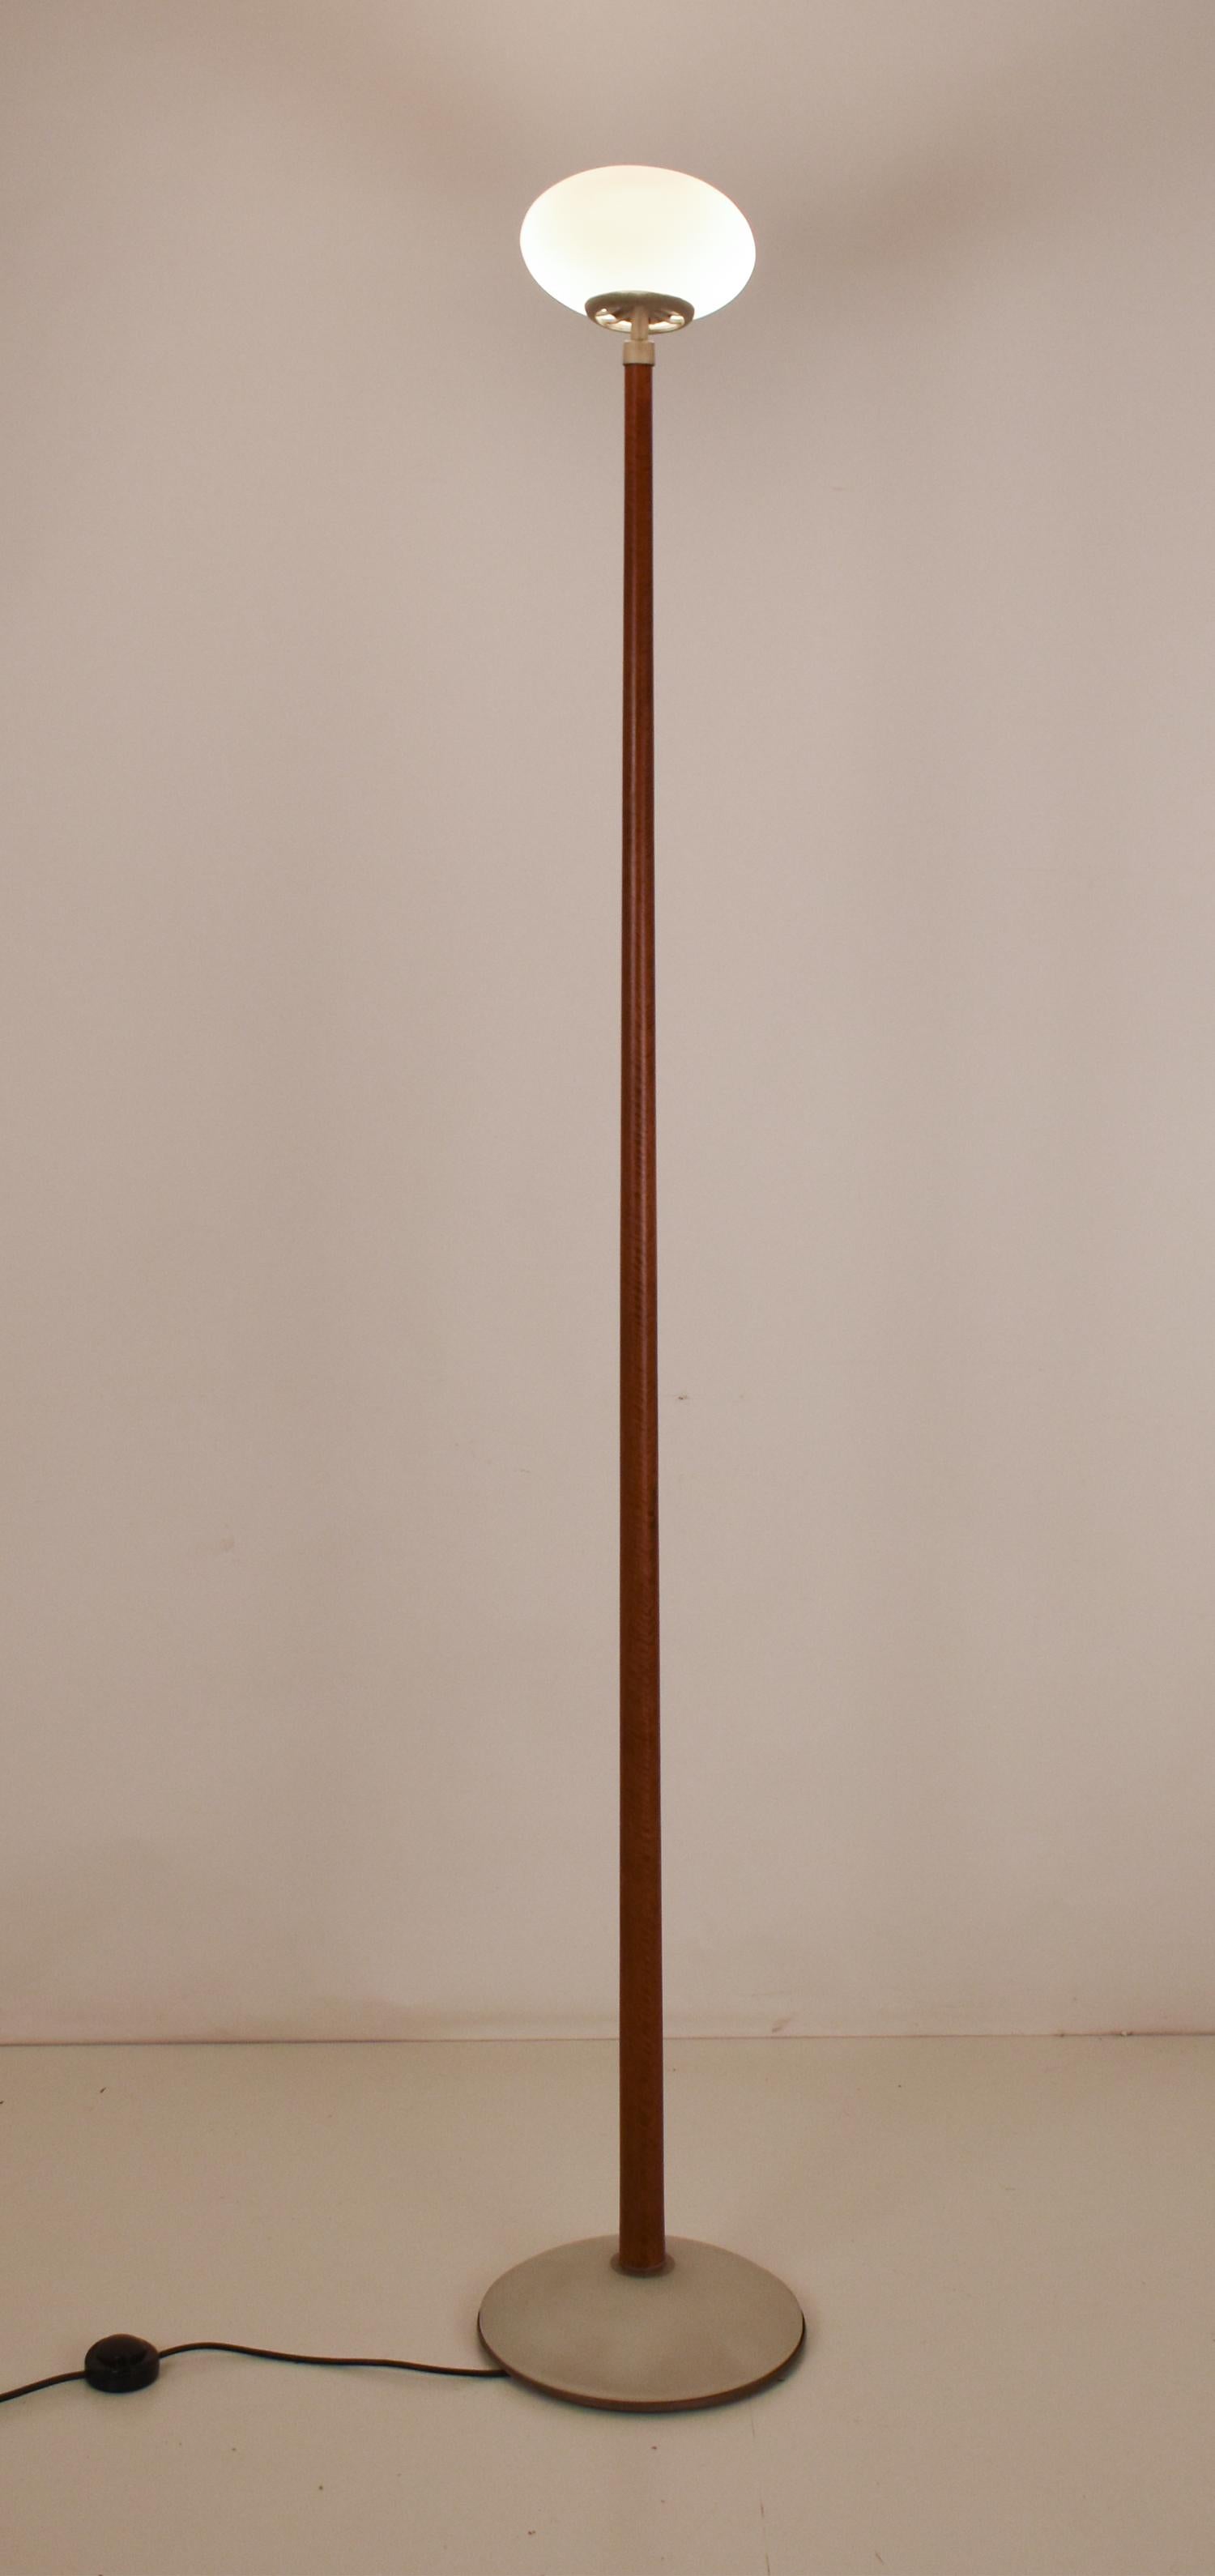 PAO Floor Lamp by Matteo Thun for Arteluce, Italy 1990's For Sale 2